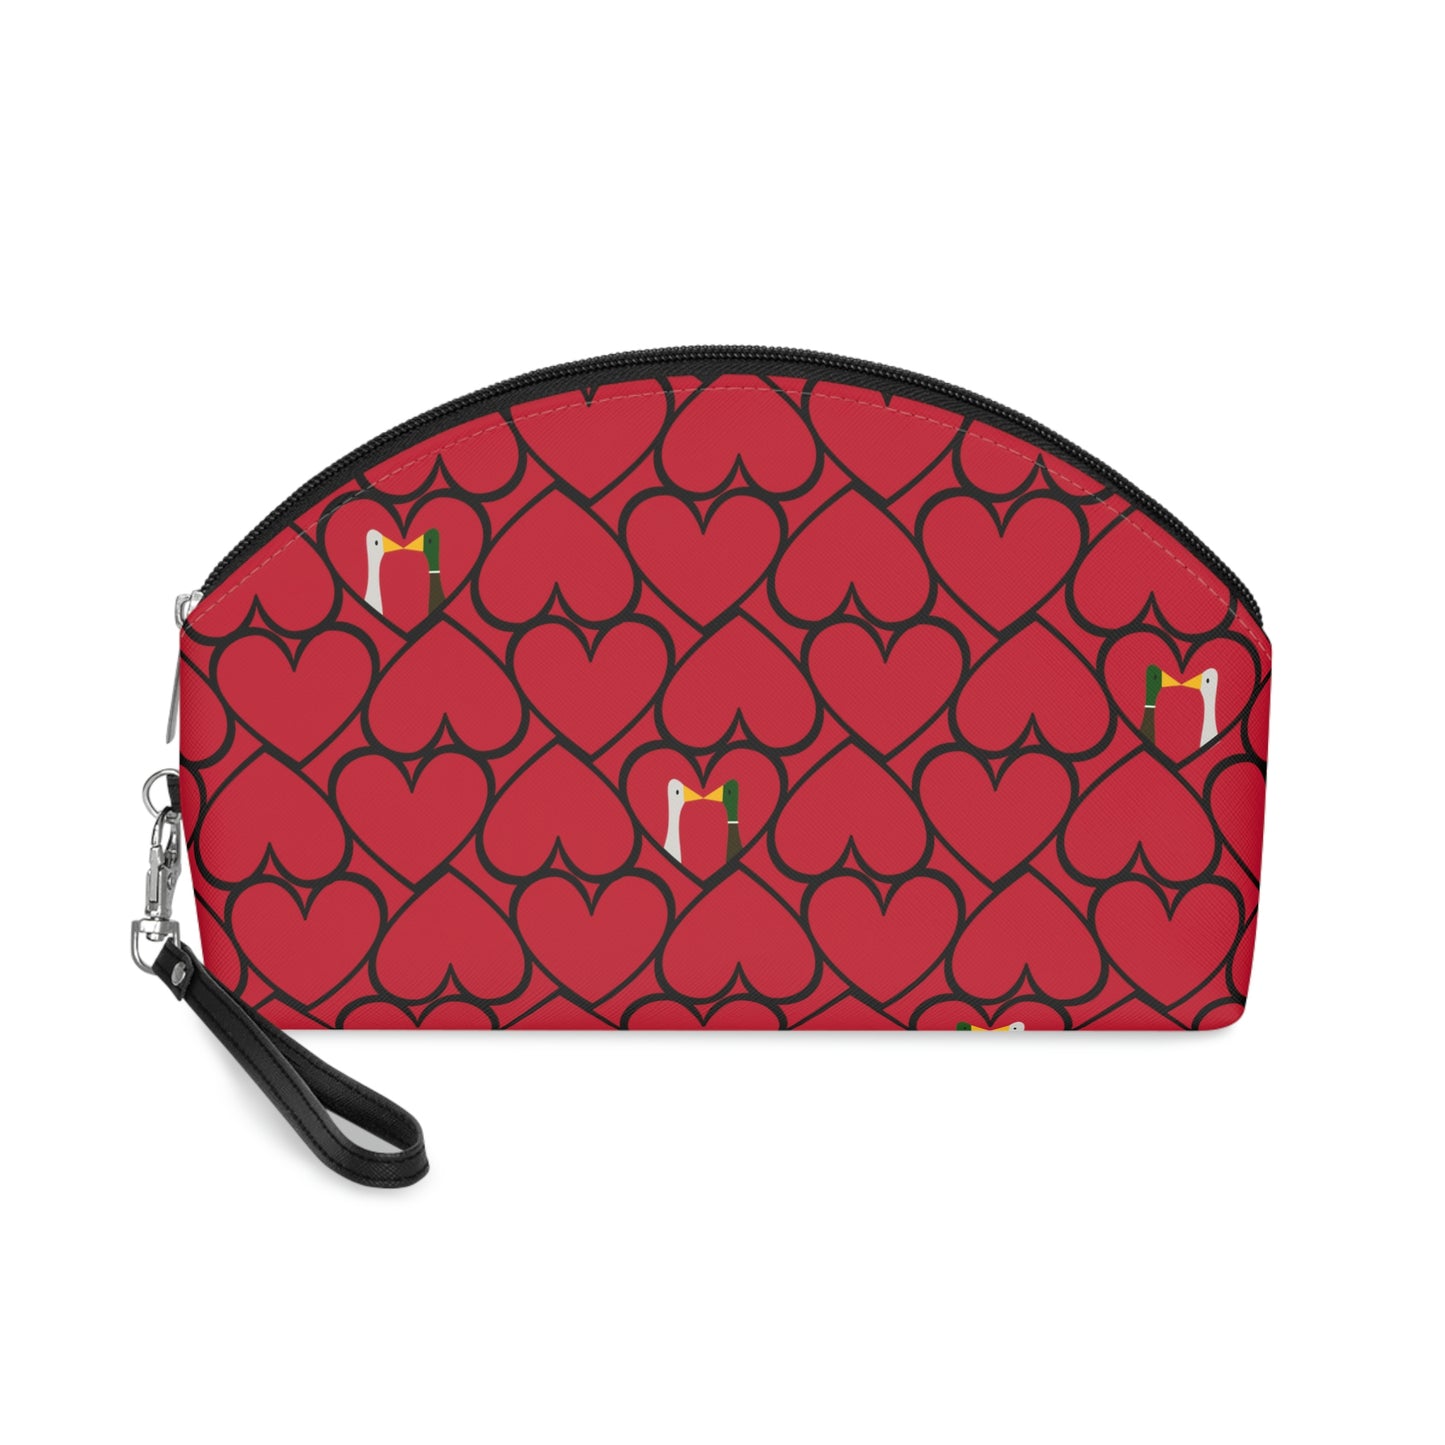 Ducks in hearts - Fire Engine Red c8092e - Makeup Bag